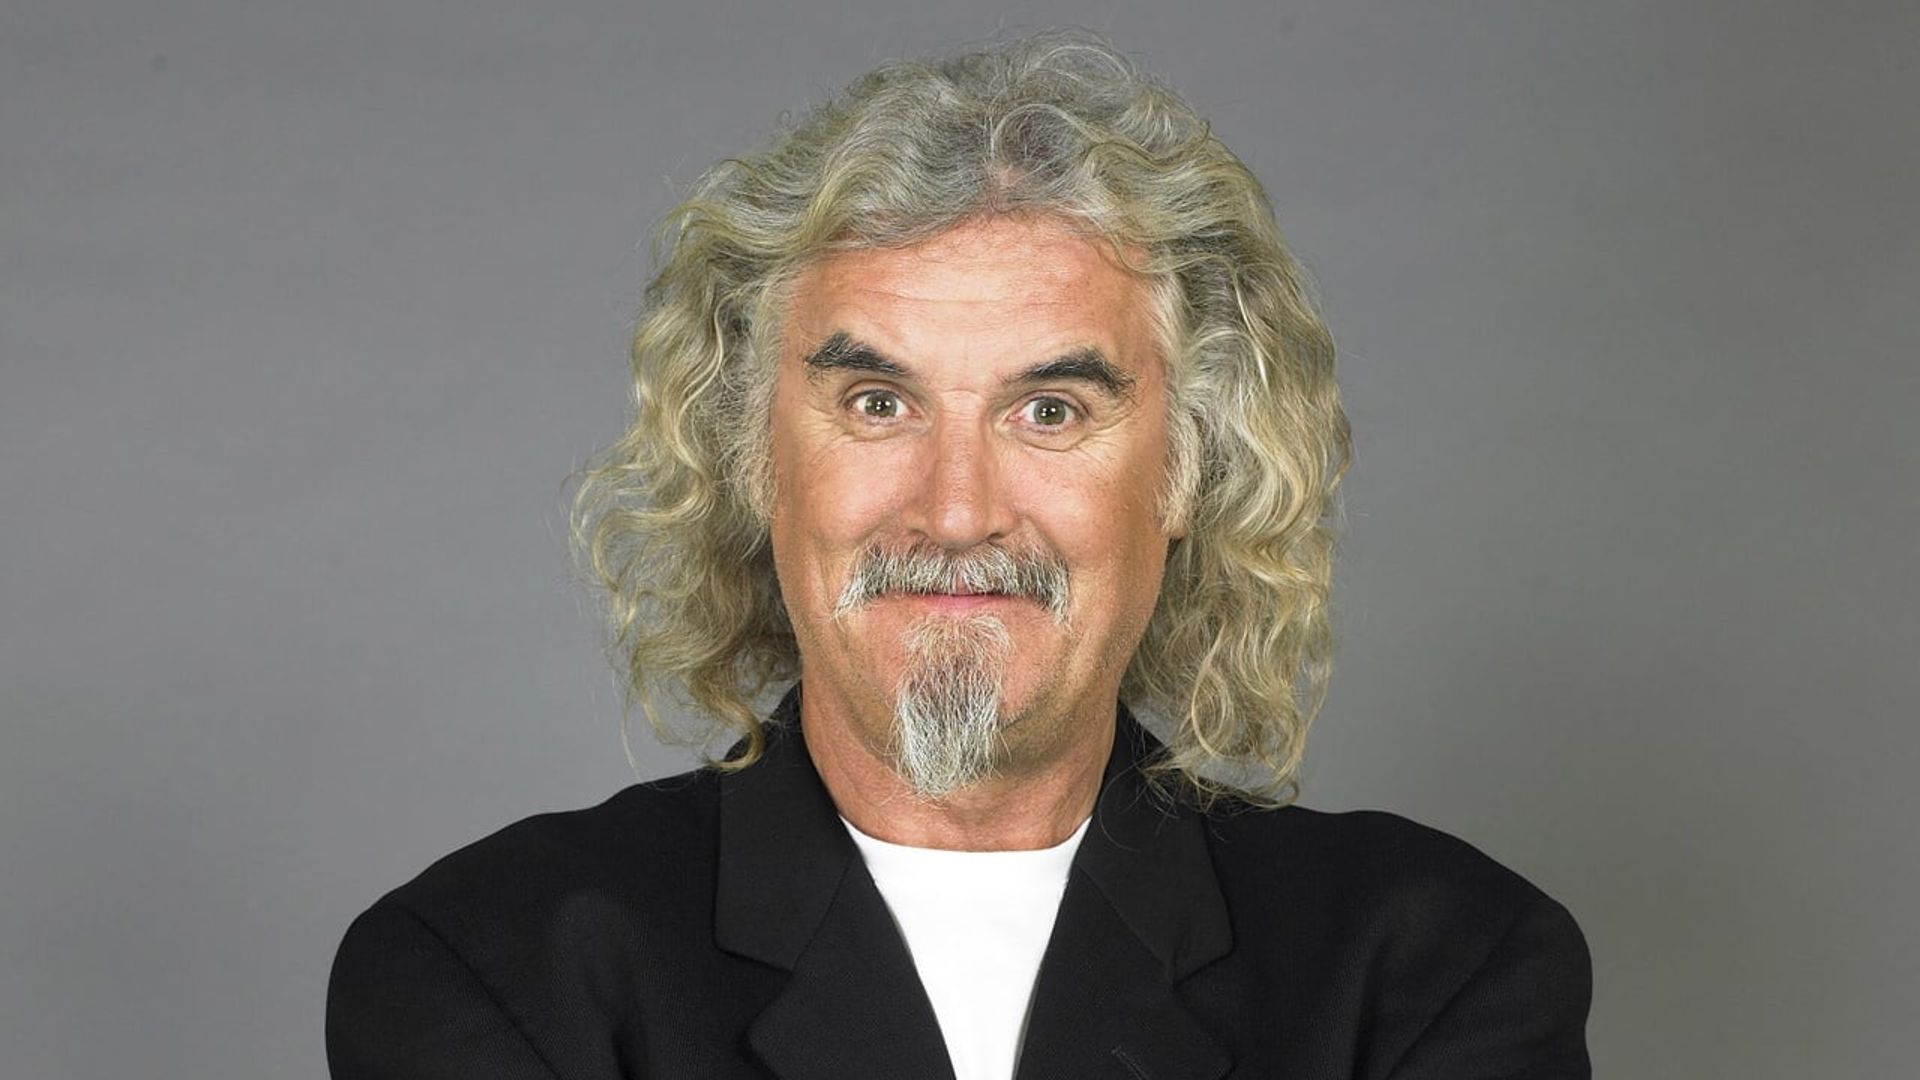 Billy Connolly's World Tour of Ireland, Wales and England background